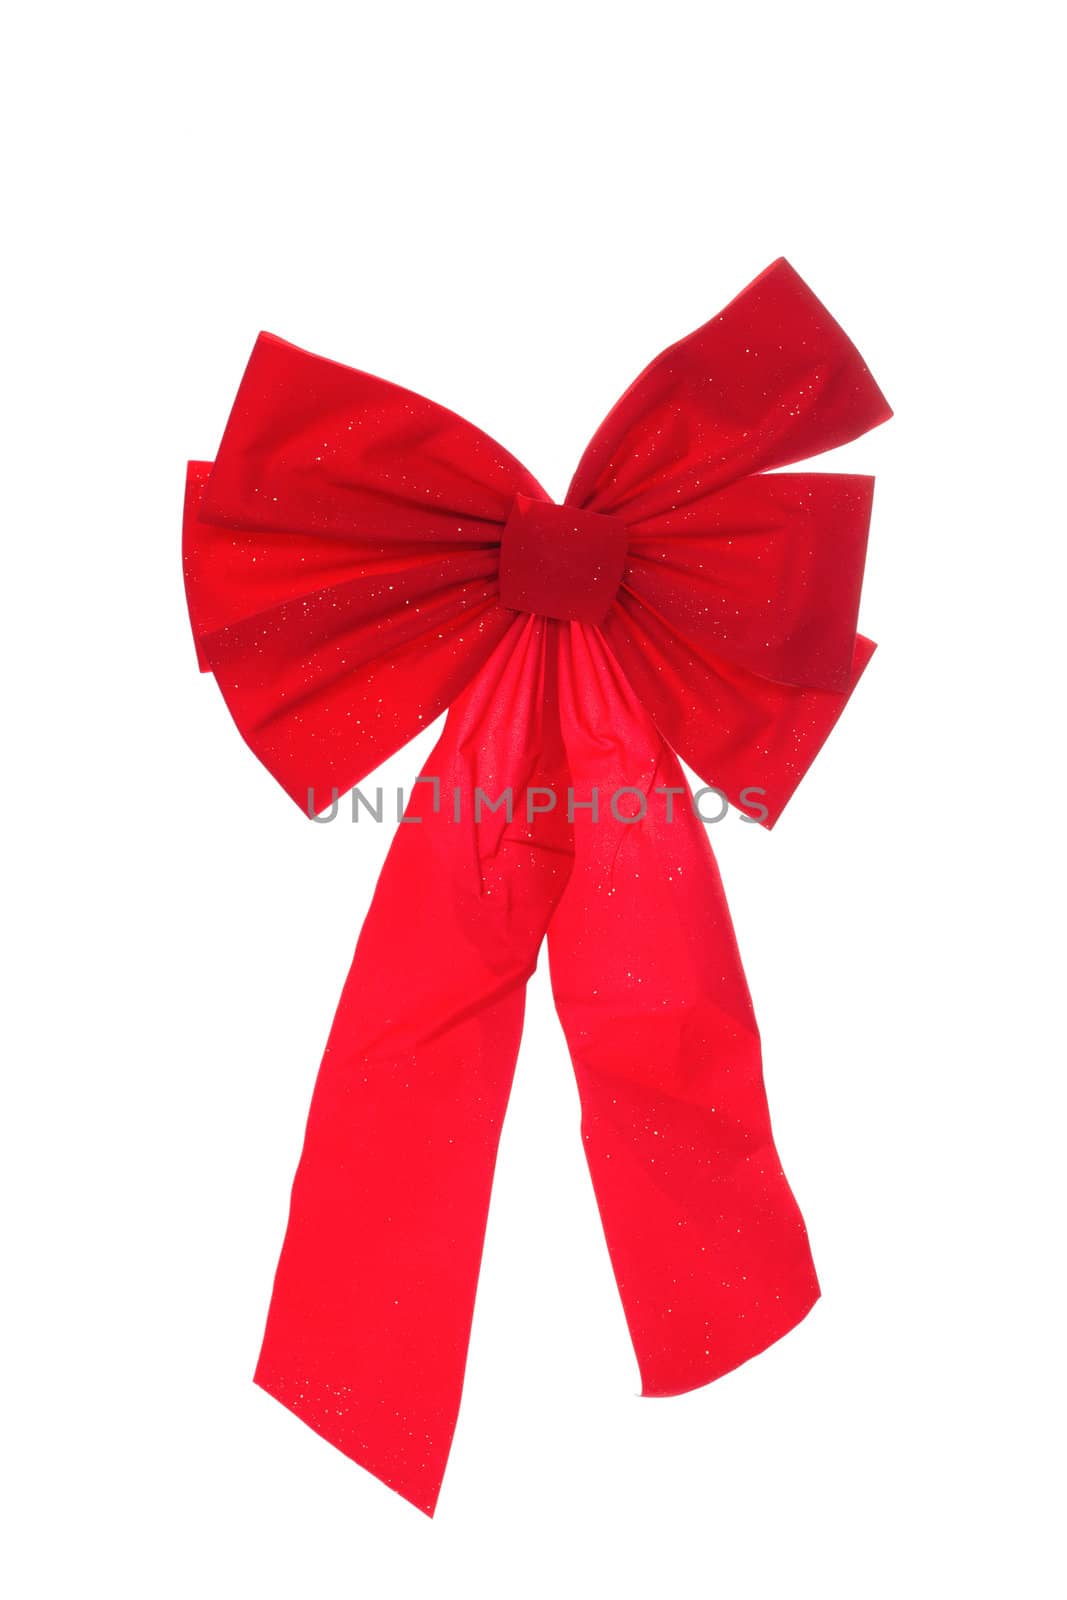 Red bow photo on the white background